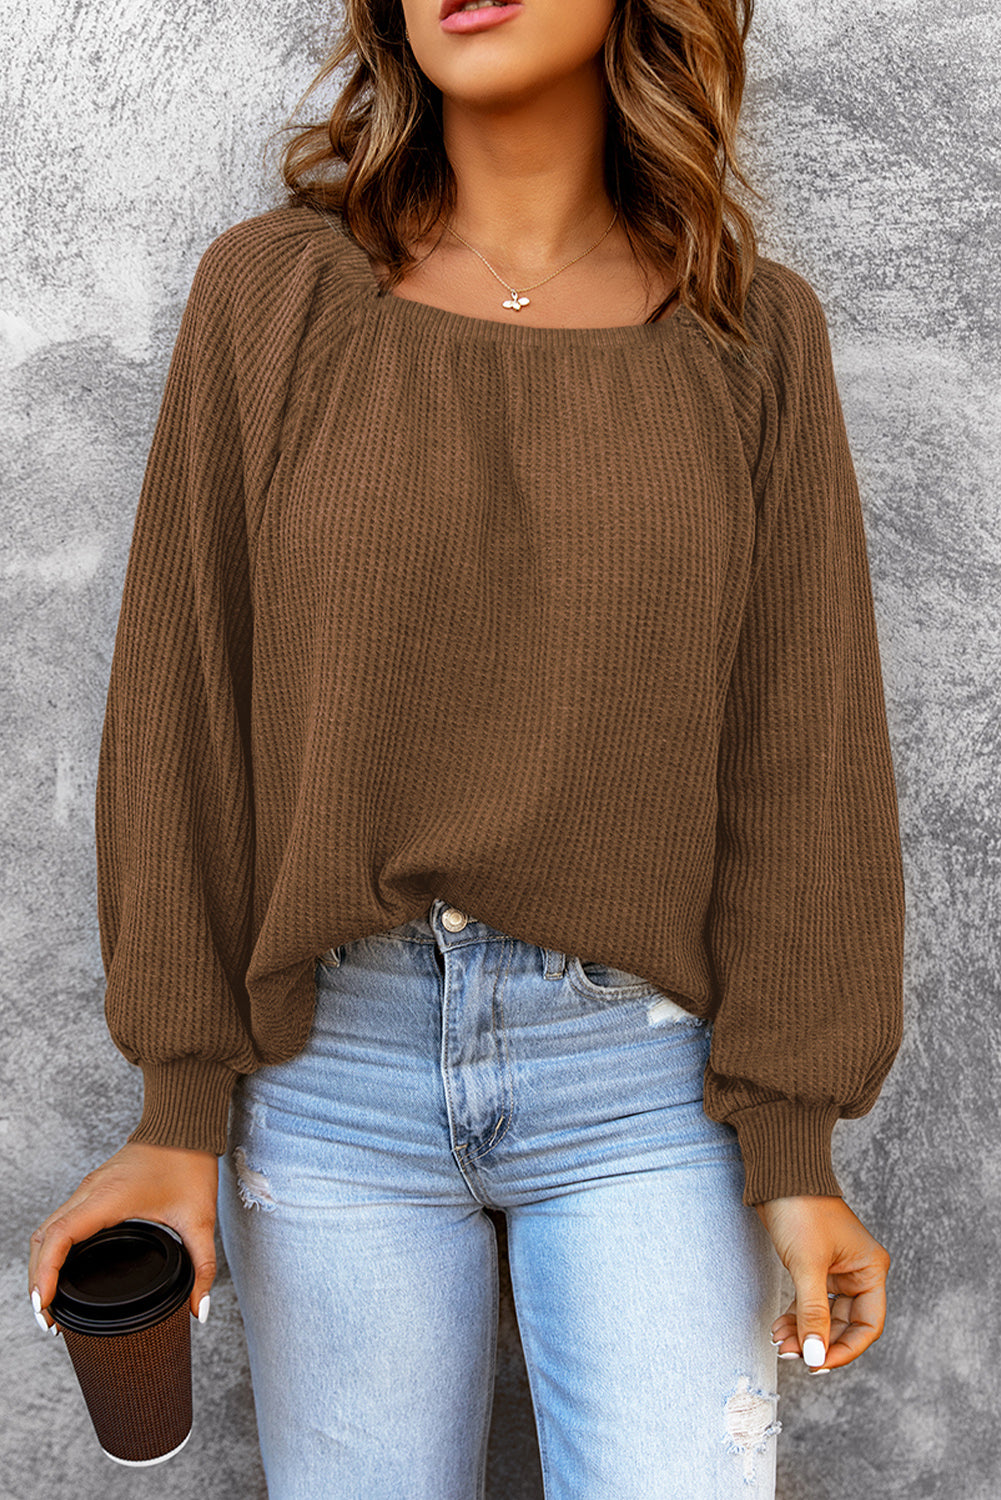 Brown Scoop Neck Puff Sleeve Waffle Knit Top Brown 95%Polyester+5%Elastane Long Sleeve Tops JT's Designer Fashion